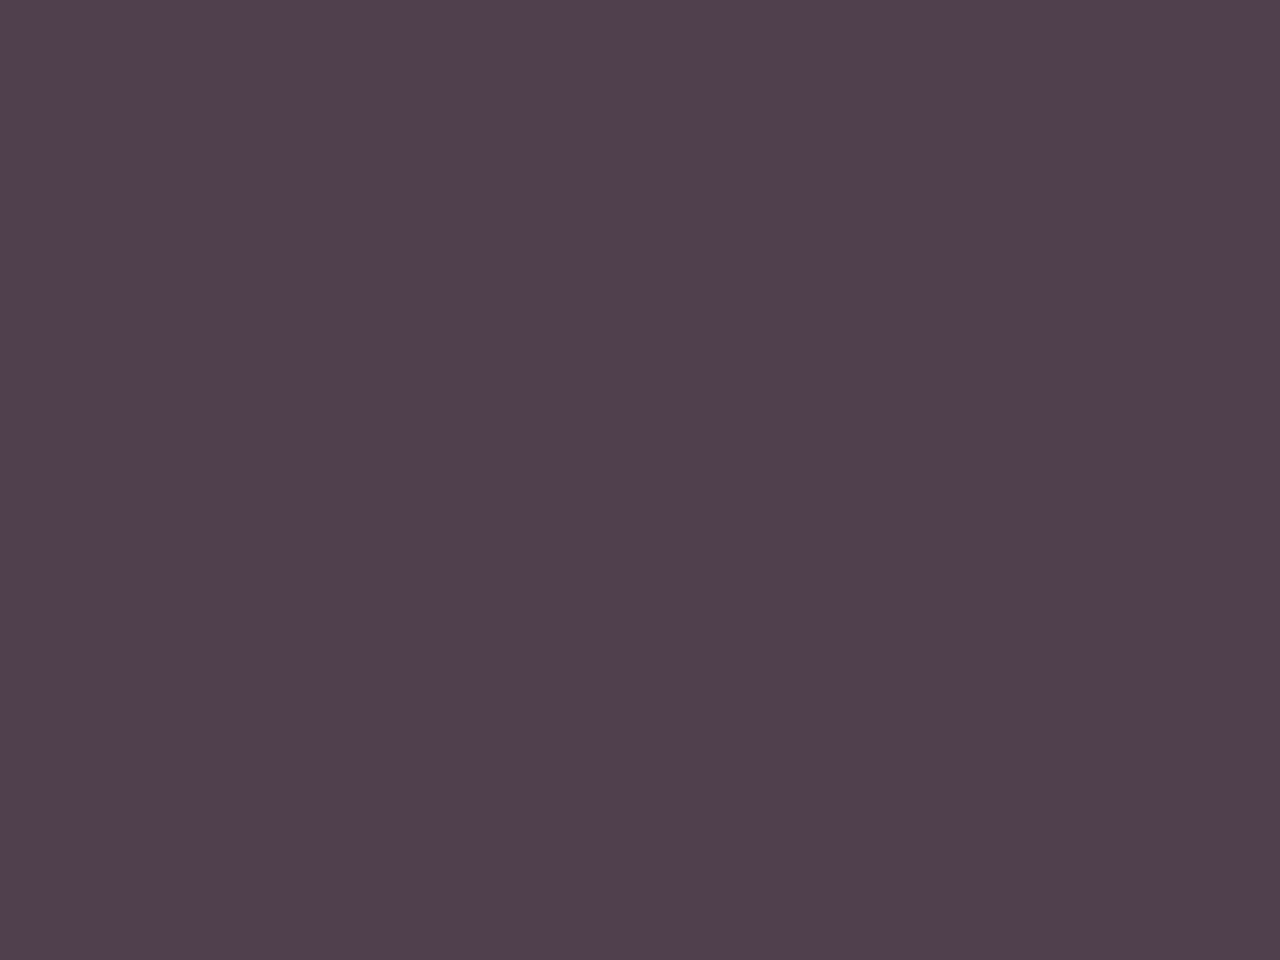 1280x960 Purple Taupe Solid Color Background